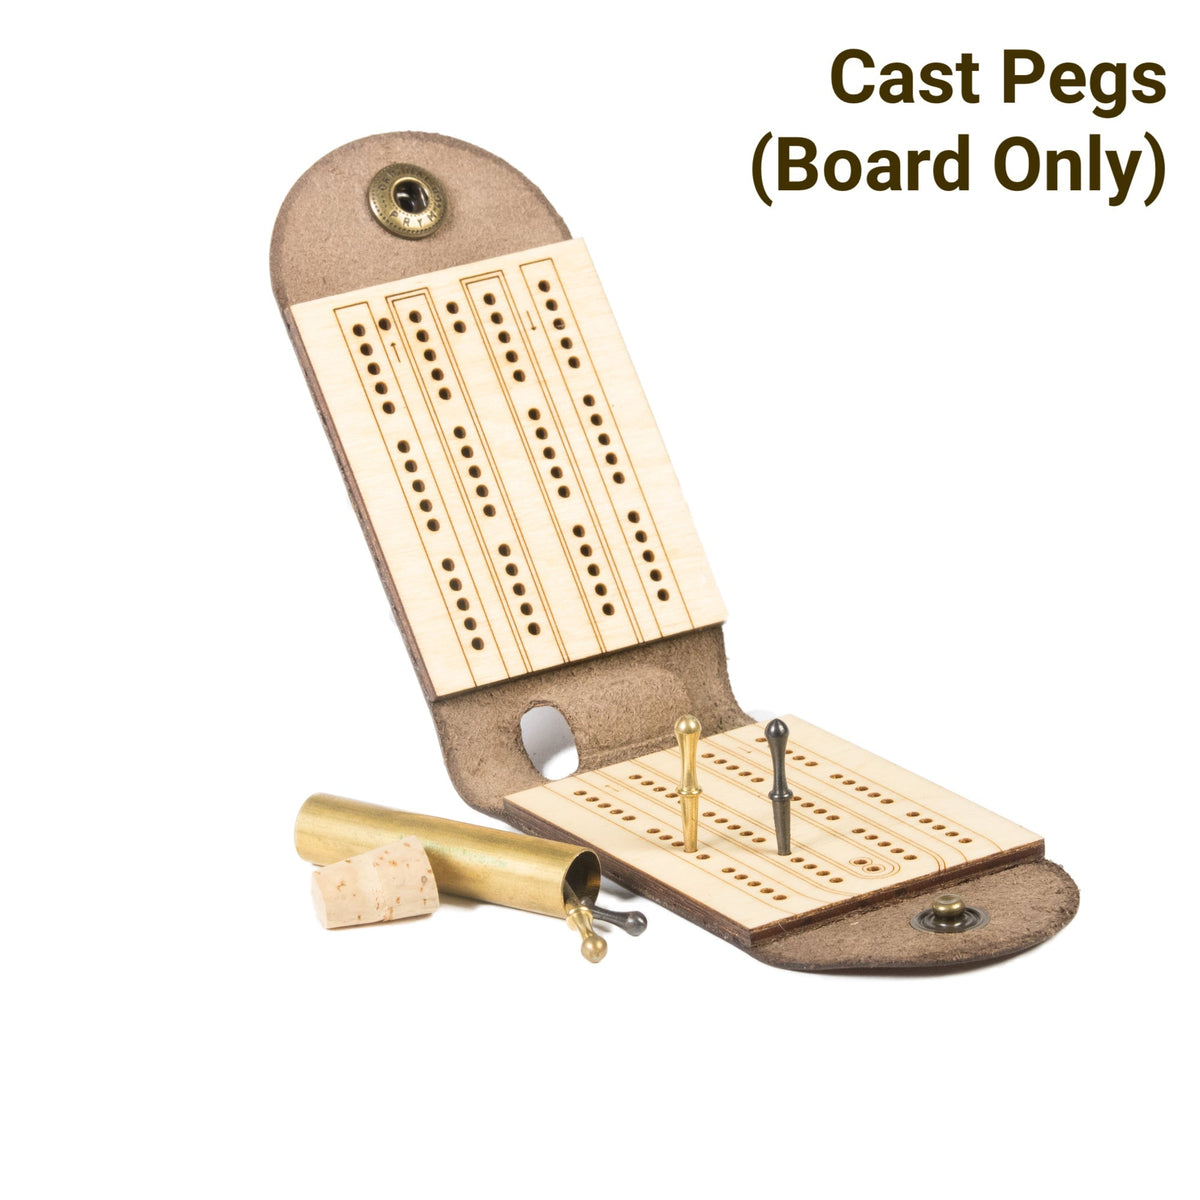 Folding leather travel cribbage board, open and unhinged, showing cast metal pegs in brass and black finishes in peg holes, and an uncorked brass tube that stores the pegs inside the hinge.